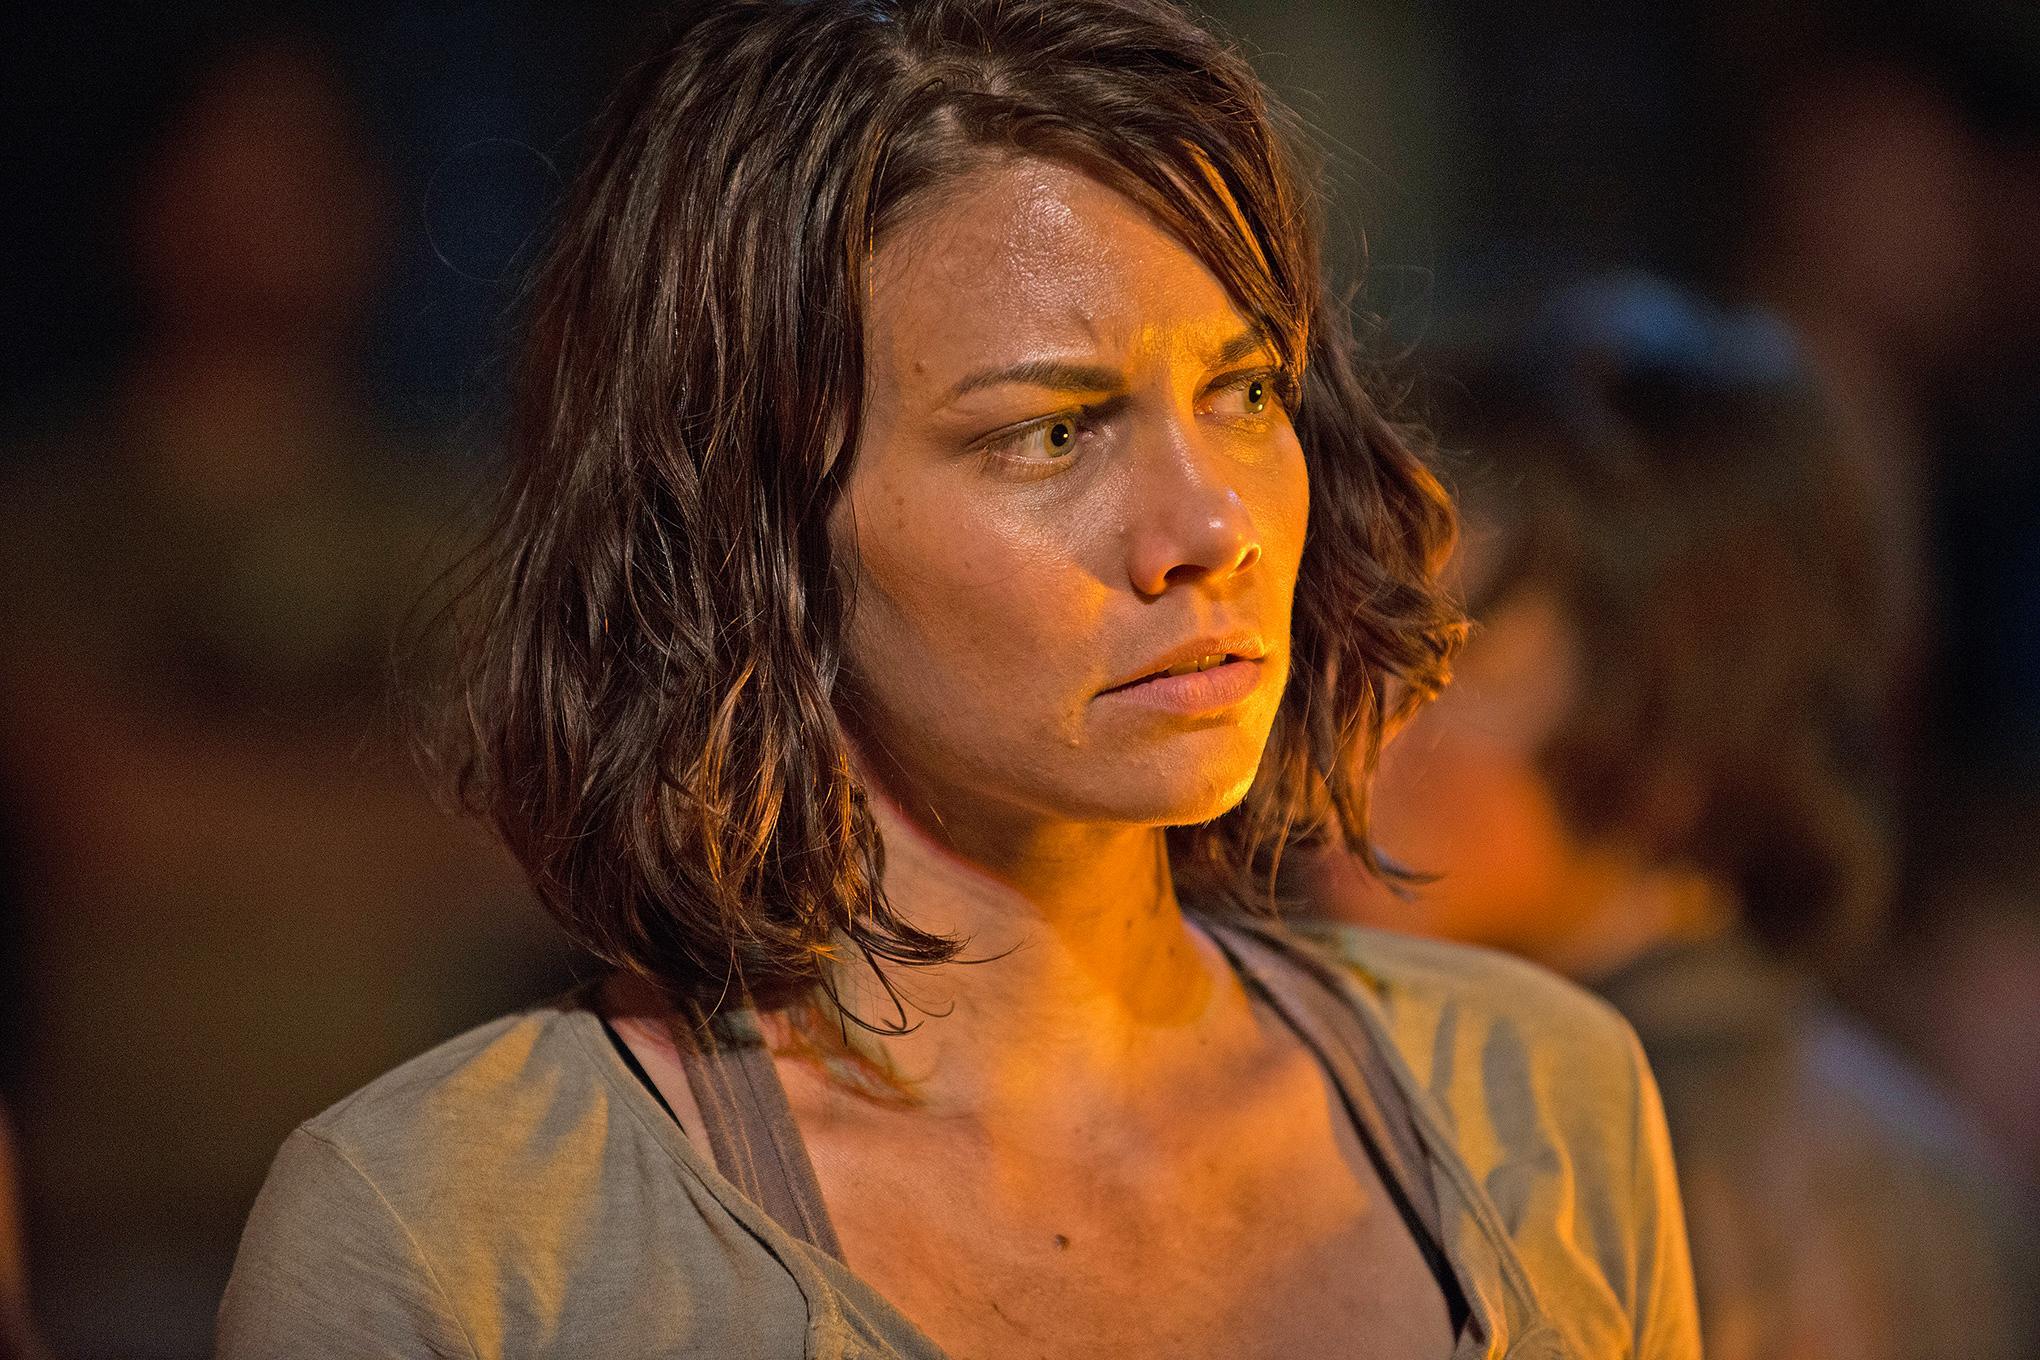 The Walking Deads Lauren Cohan Id Rather Have The Validation Of 8243